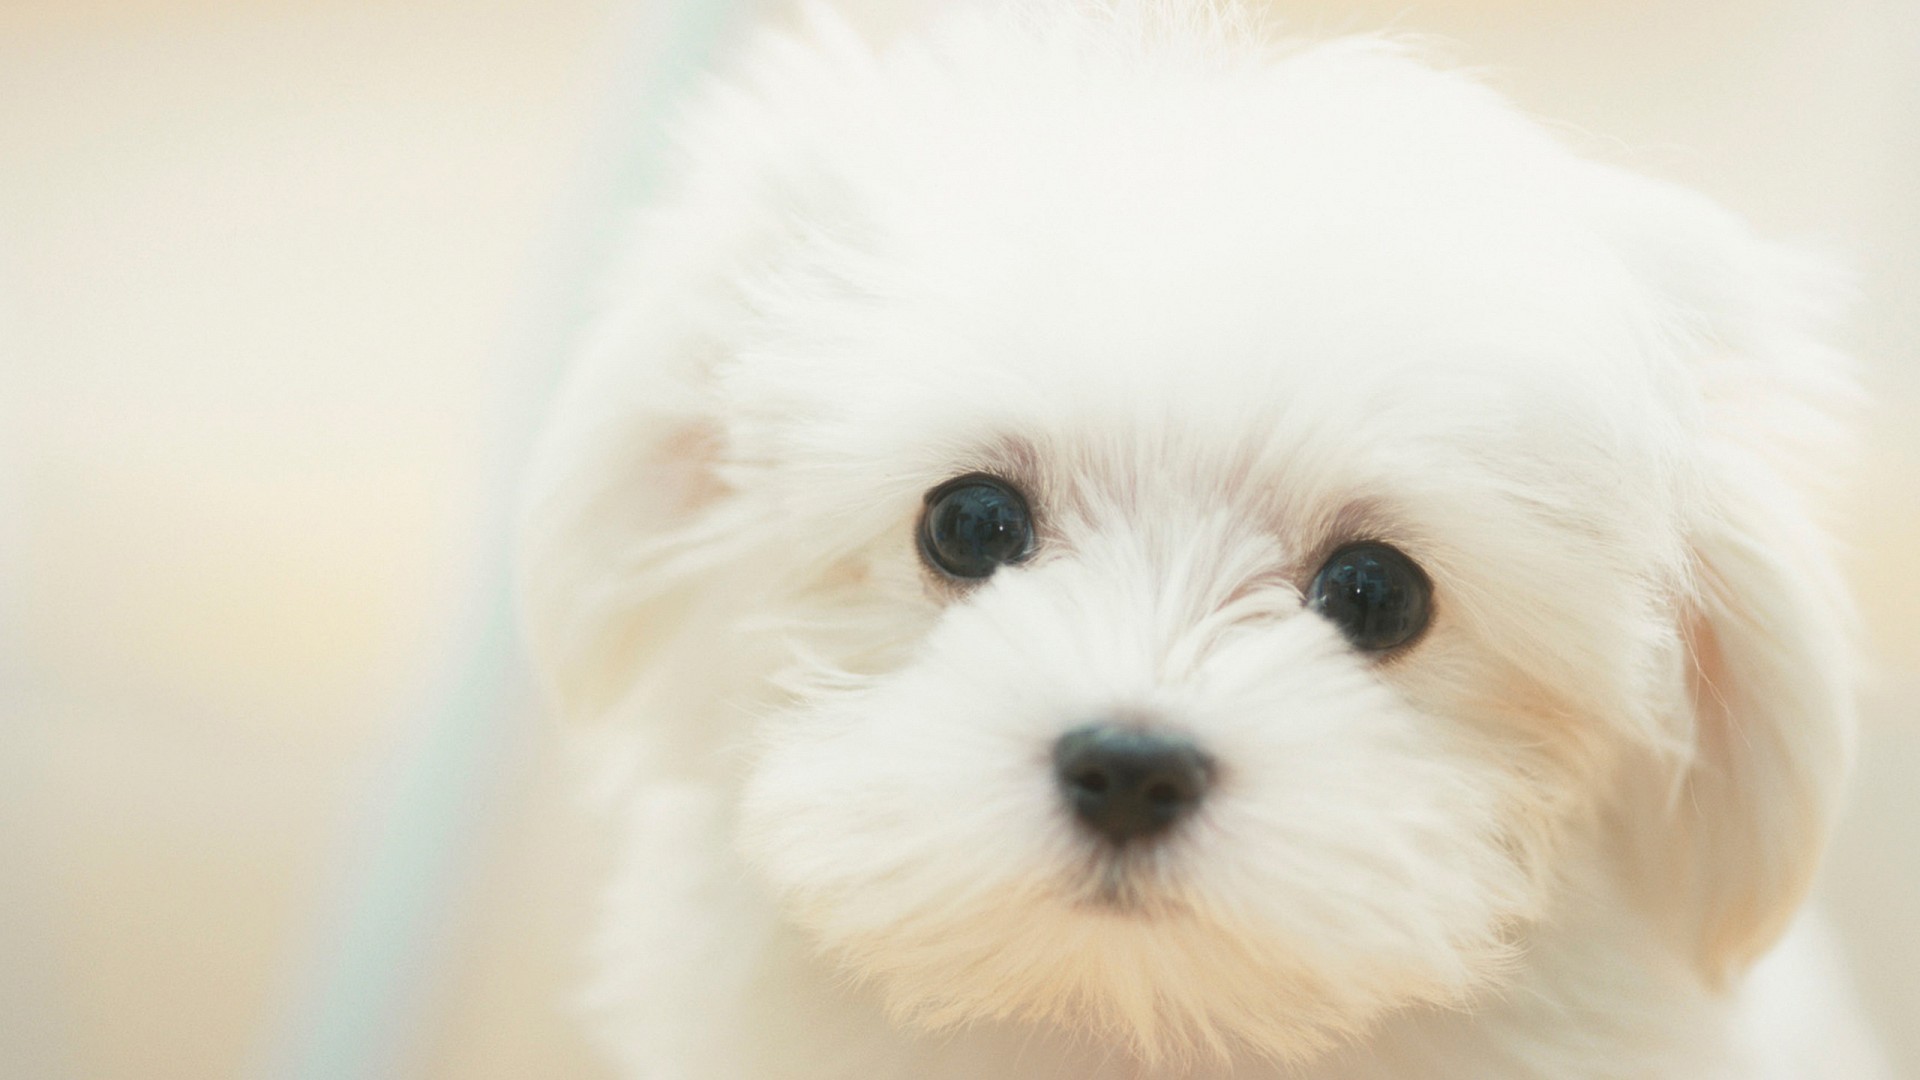 1920x1080 white puppy (1920 x 1080) Need #iPhone #6S #Plus #Wallpaper